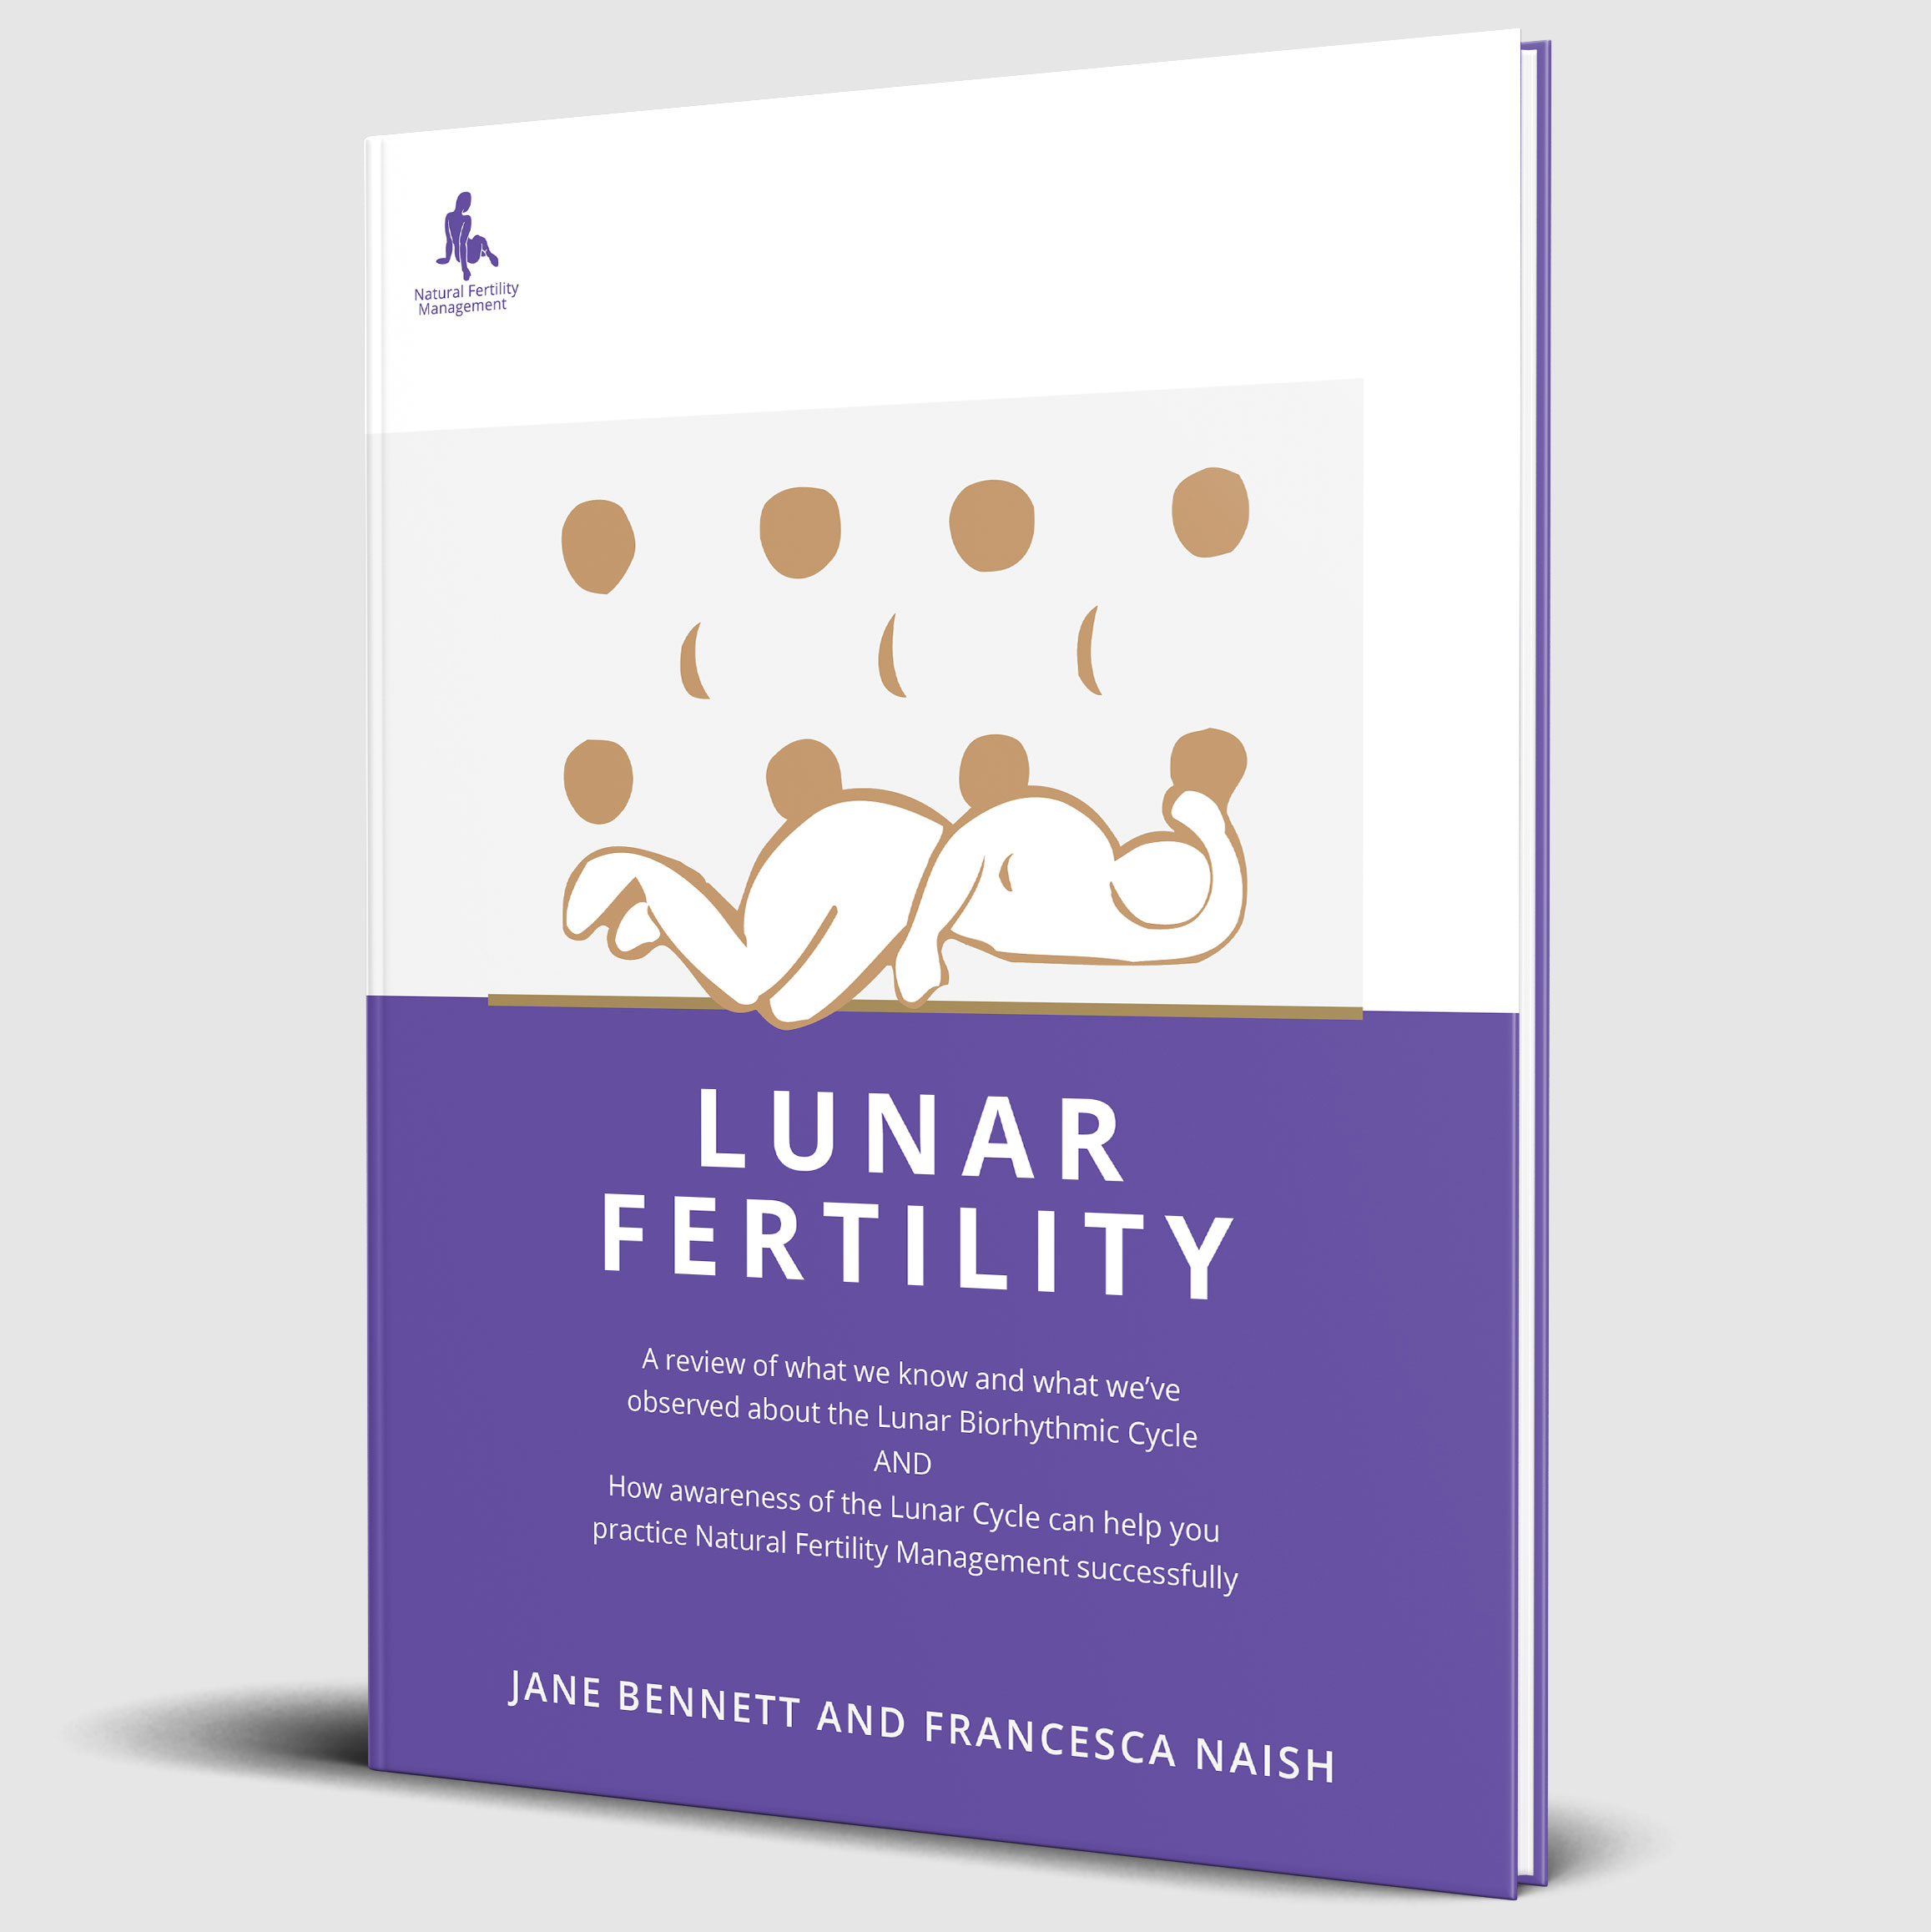 A review of what we know and what we’ve observed about the Lunar Biorhythmic Cycle and how this information can help you manage your fertility and understand your own menstrual cycles.